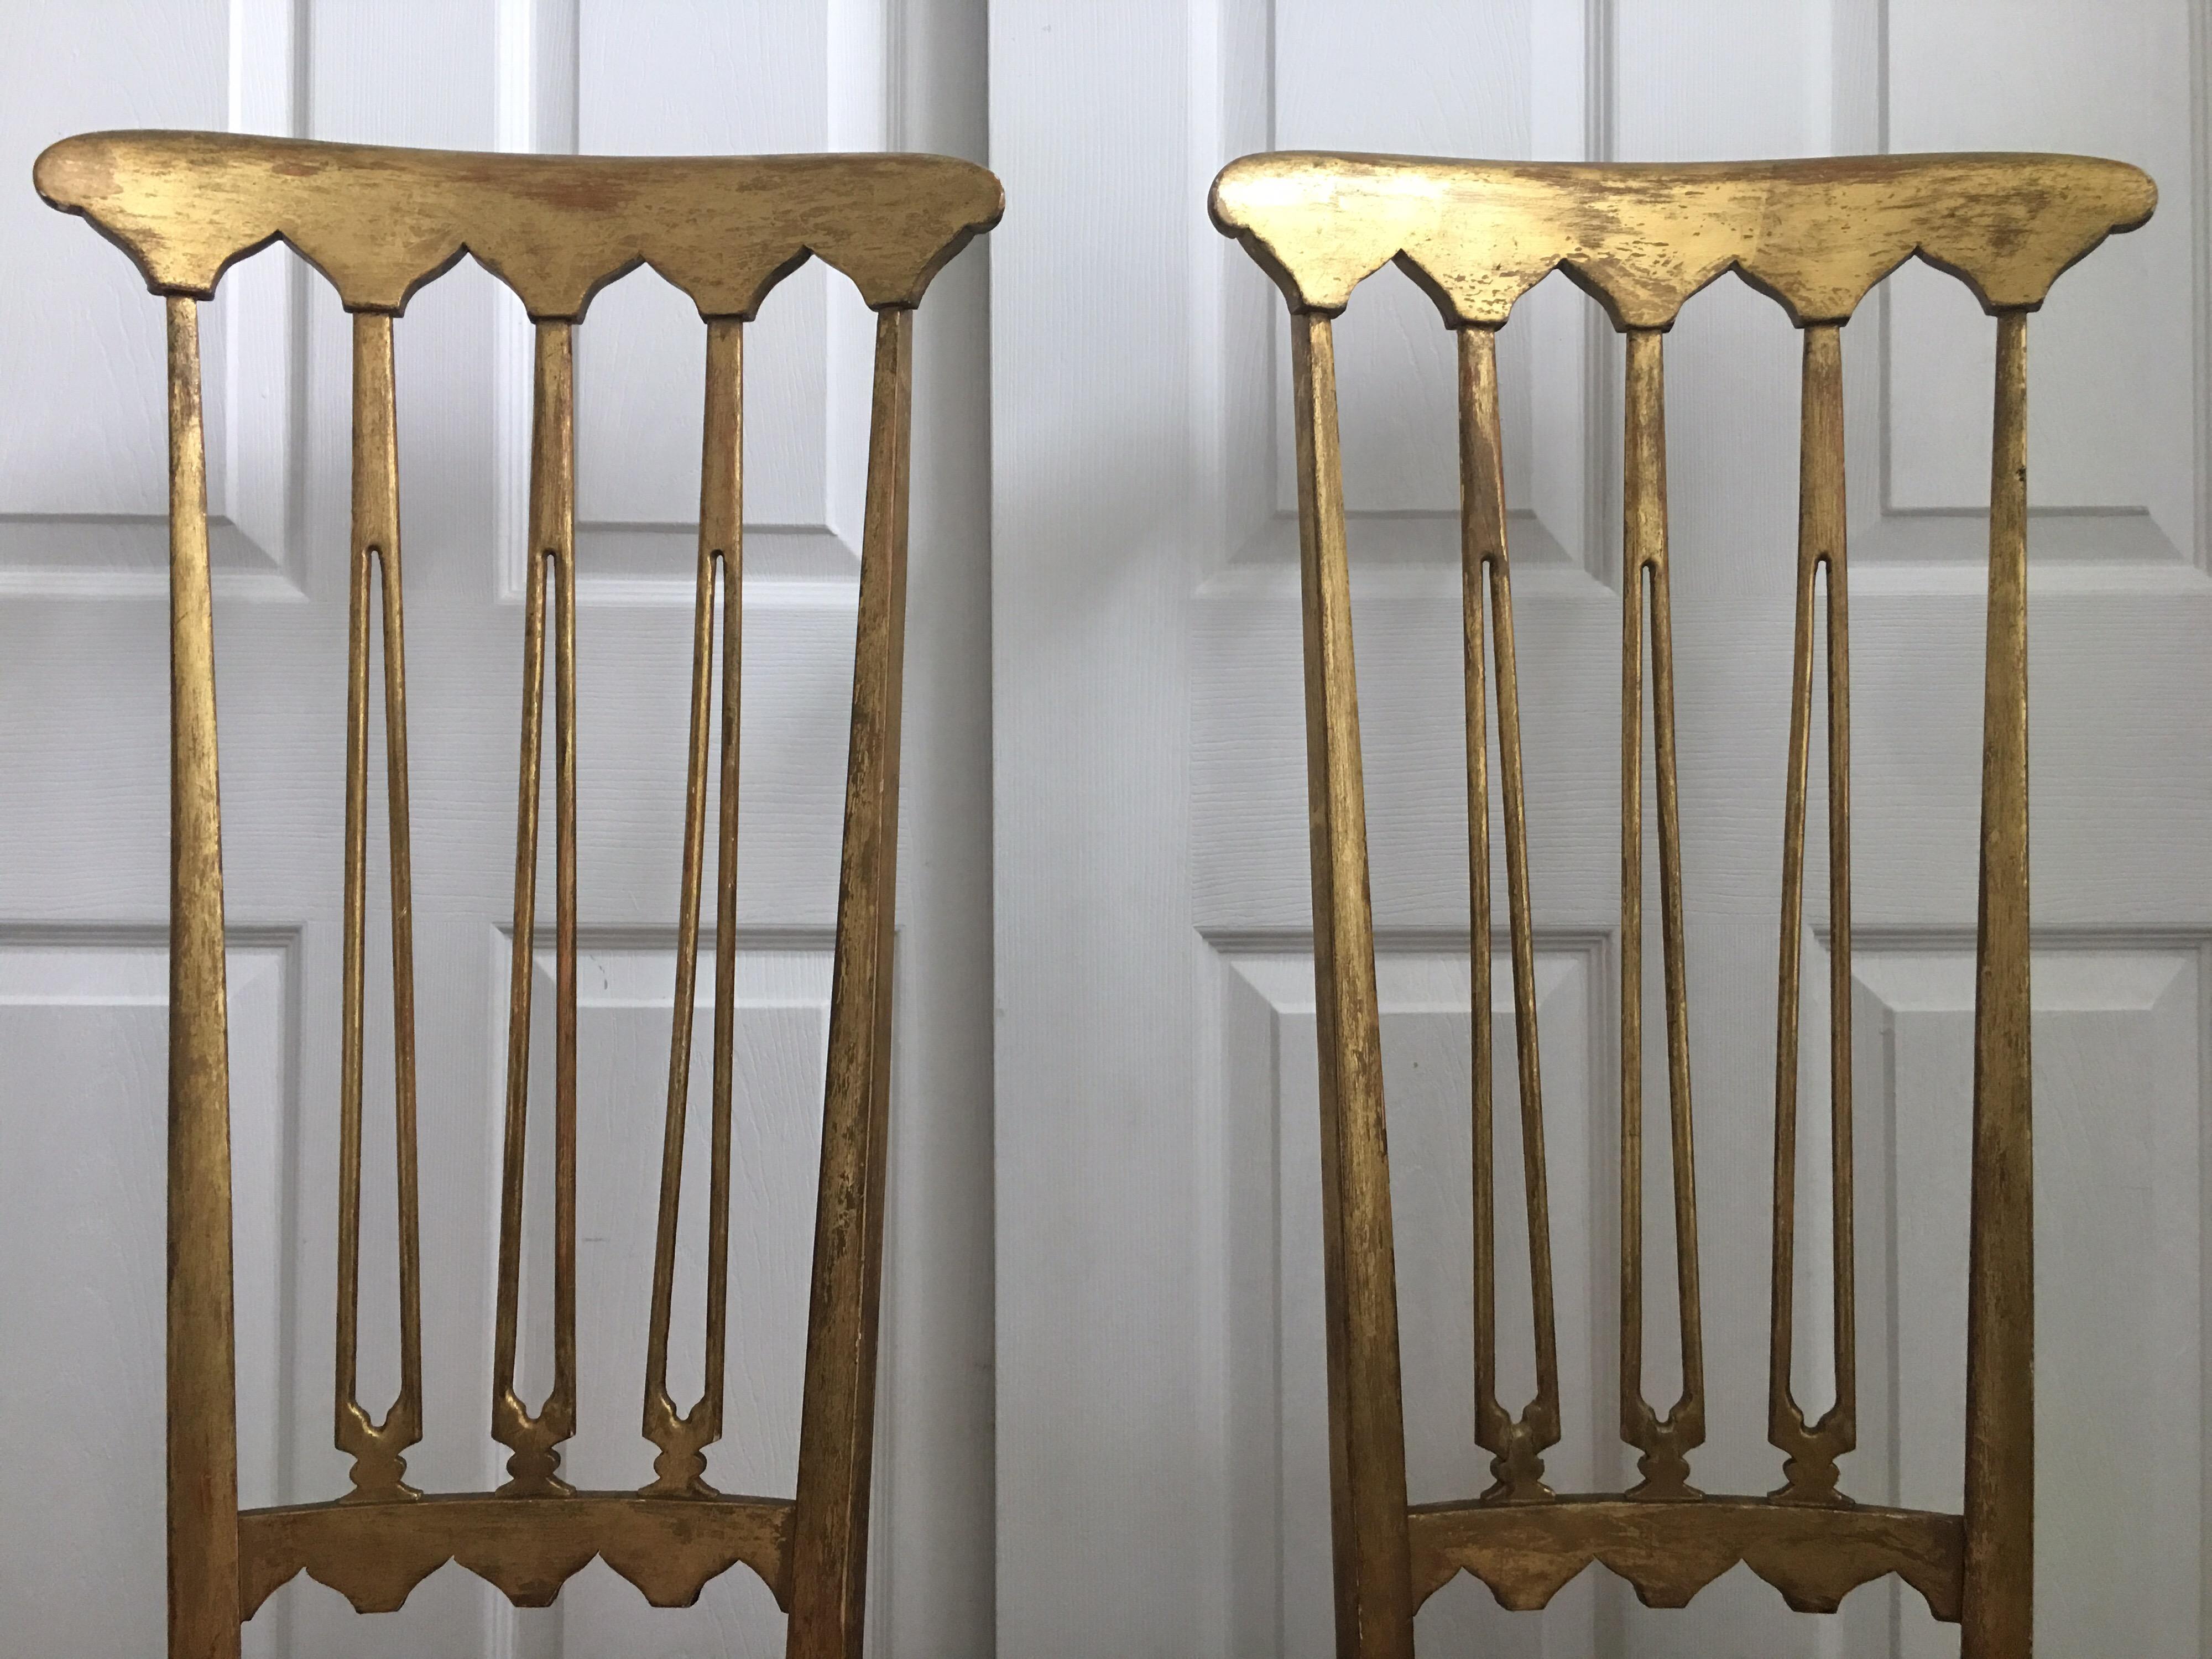 Pair of Mid-Century Modern Hollywood Regency style gilded wood Chiavari side chairs. These tall high back Italian chairs feature hand carved wood detailing and striped upholstered seats. Dramatic accent seating for a dining or living room.
 